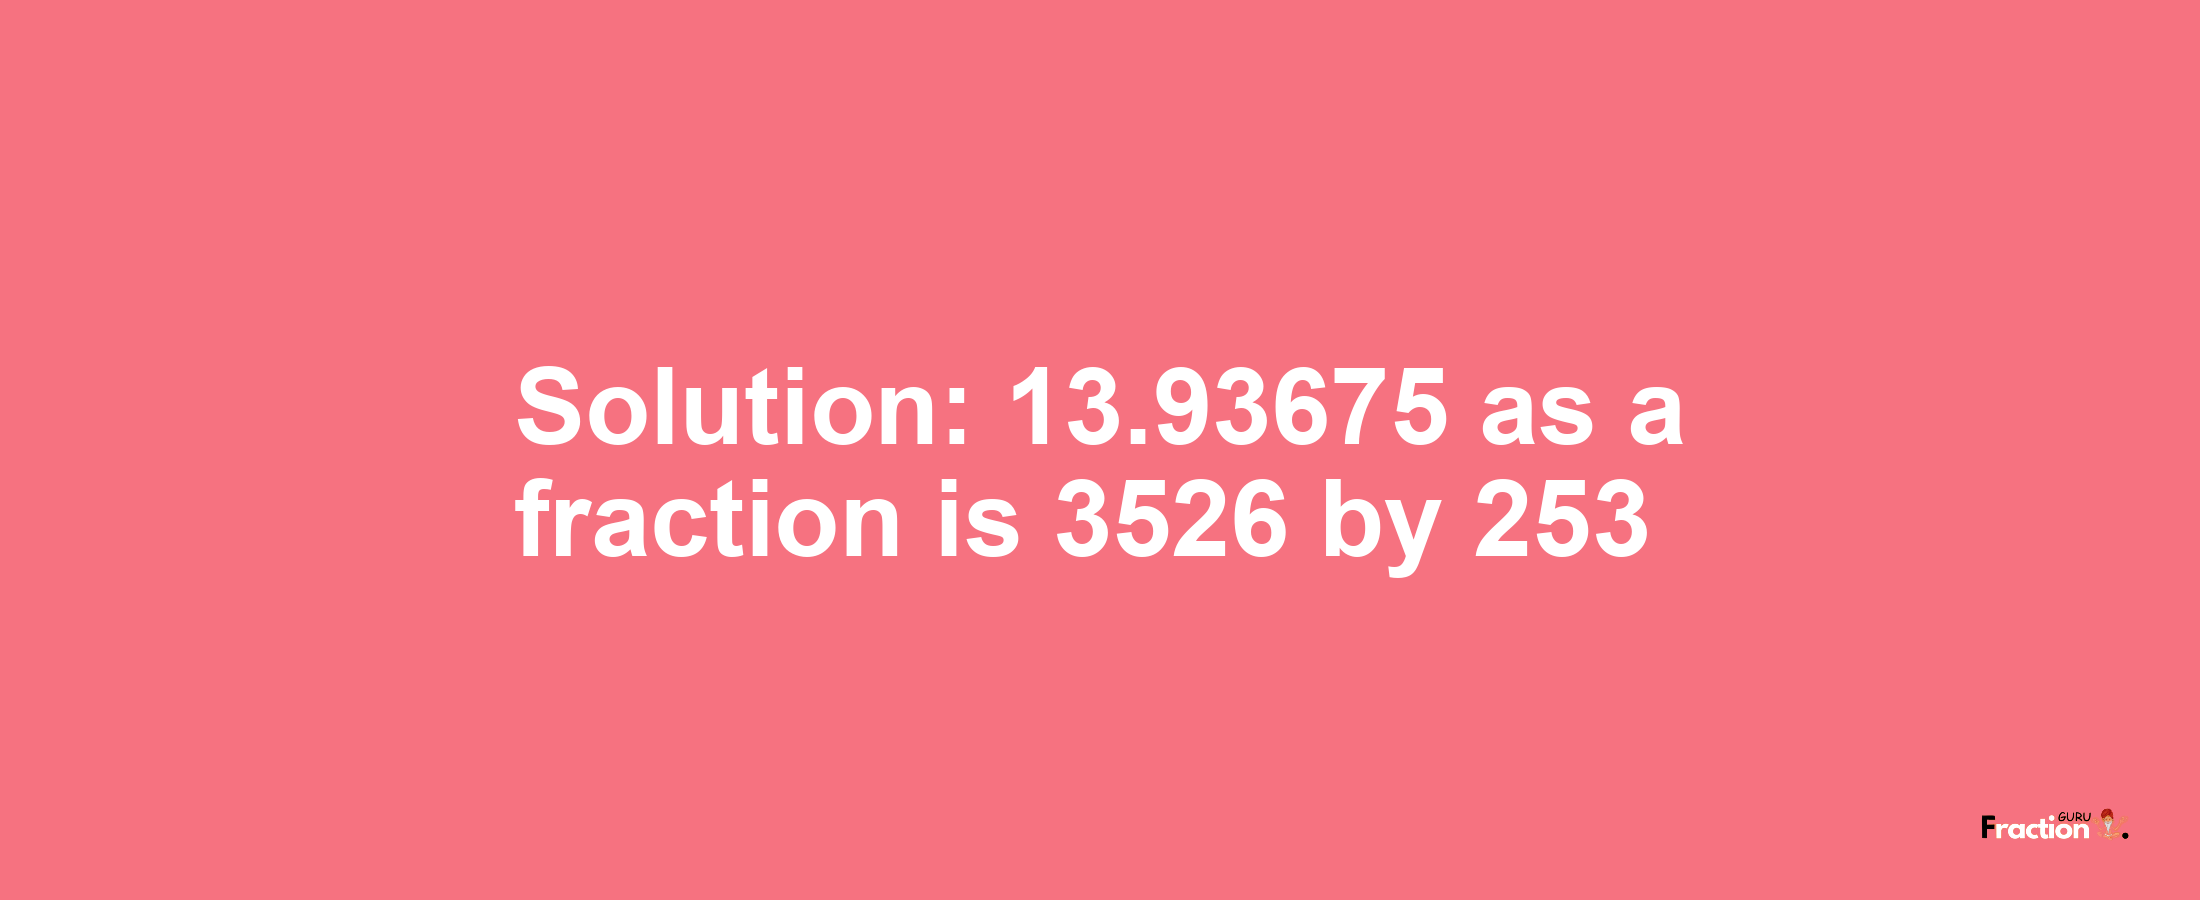 Solution:13.93675 as a fraction is 3526/253